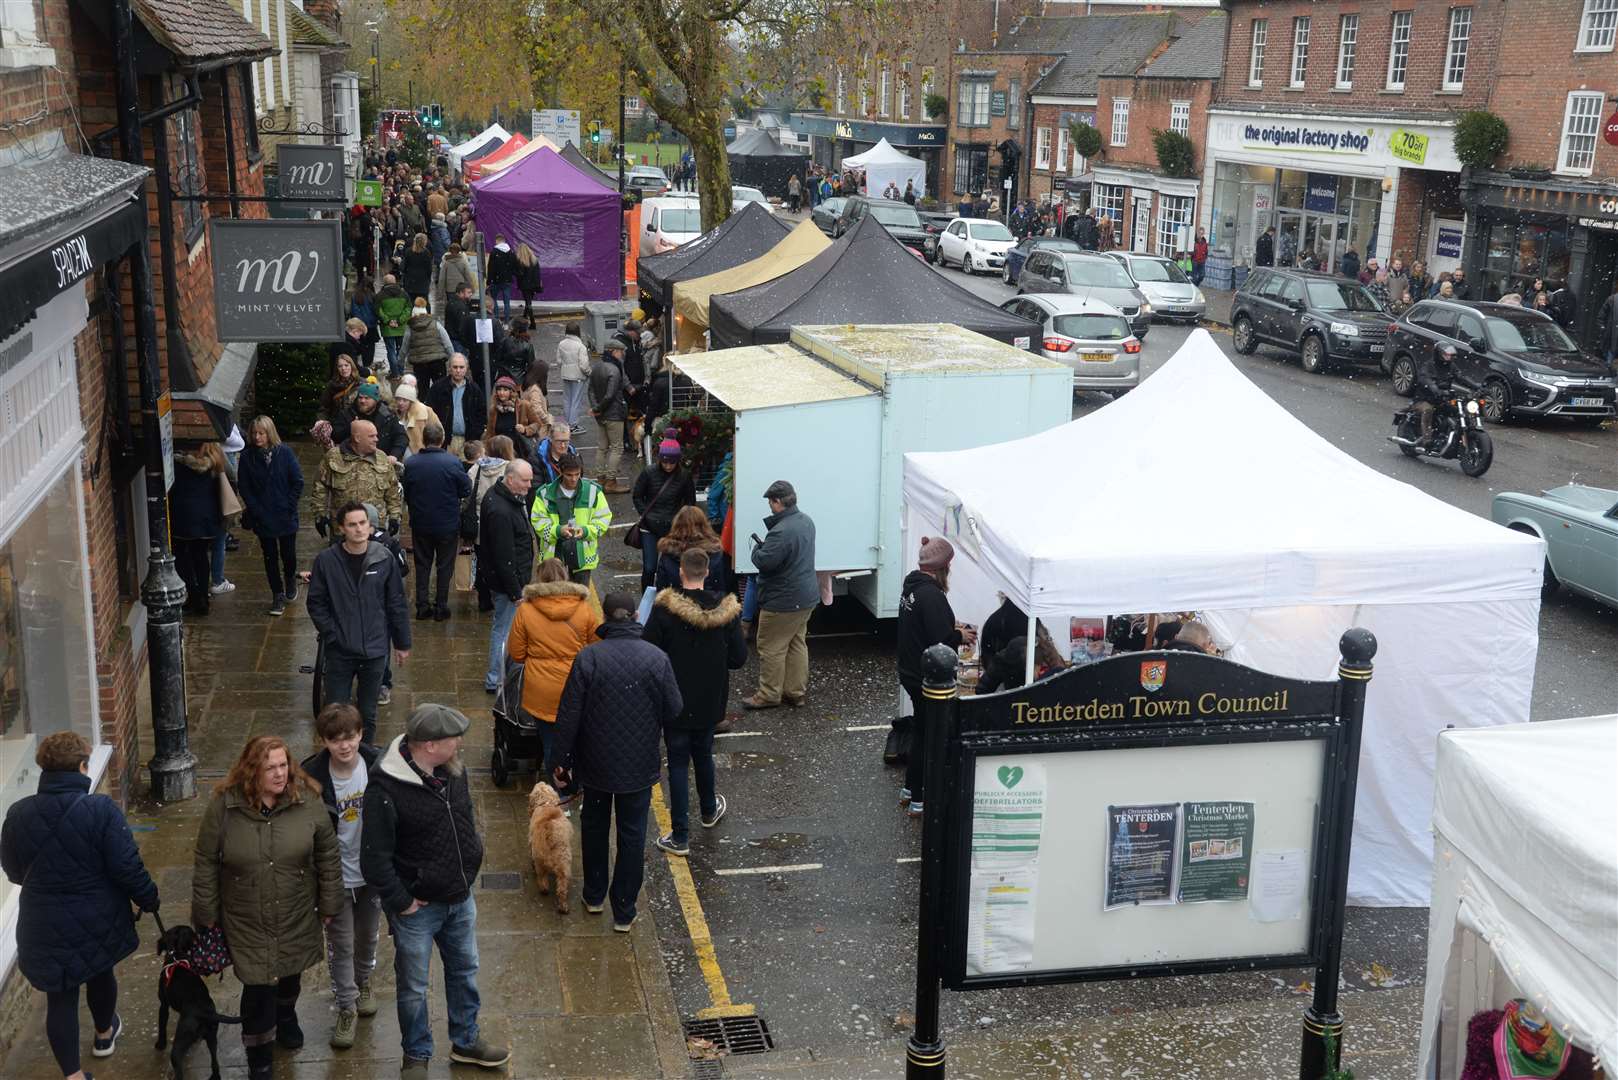 The market attracts around 14,000 people in three days. Picture: Chris Davey